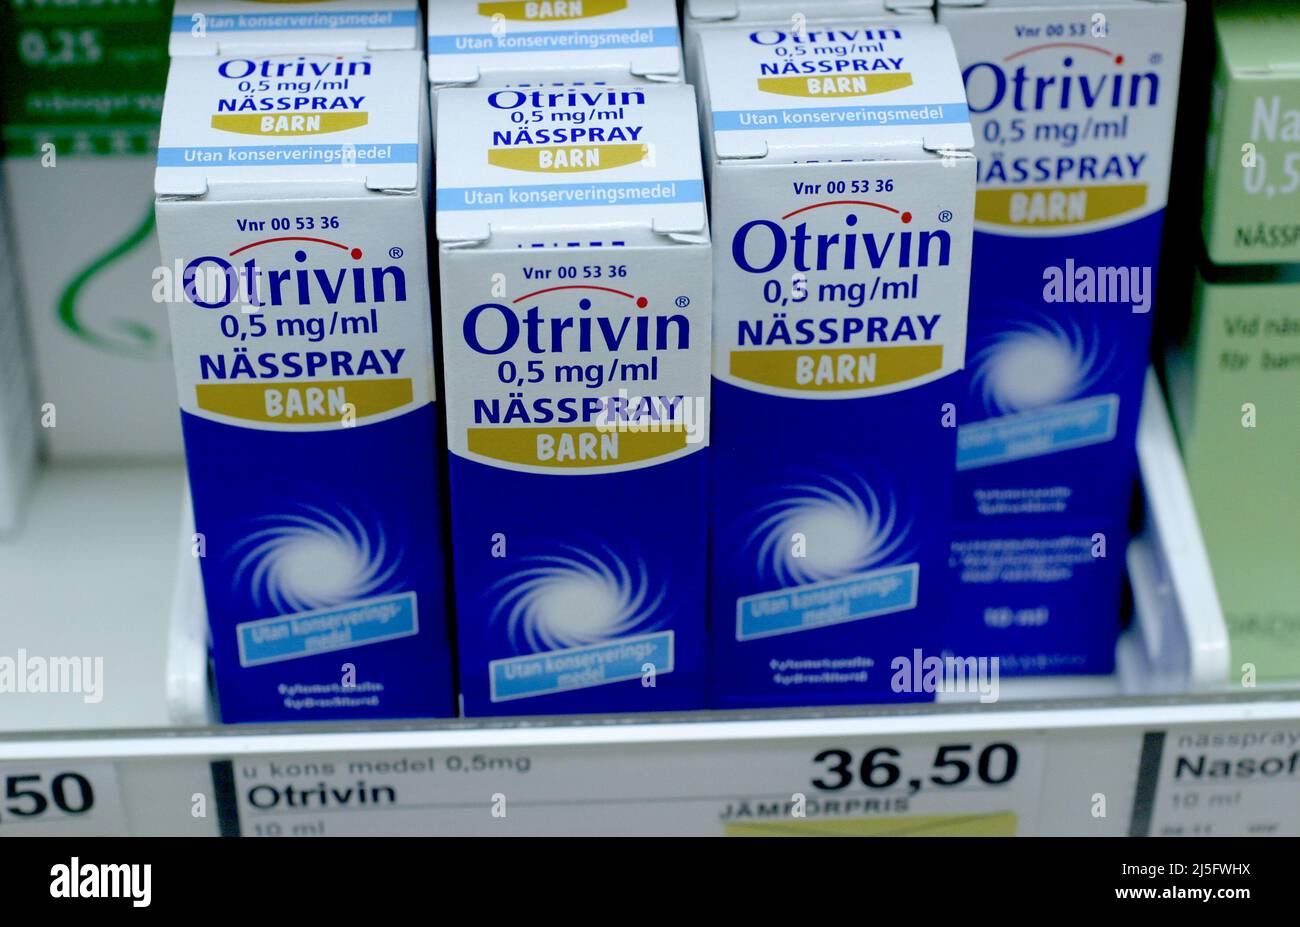 Otrivin 0,5 mg/ml photographed in a pharmacy. Stock Photo